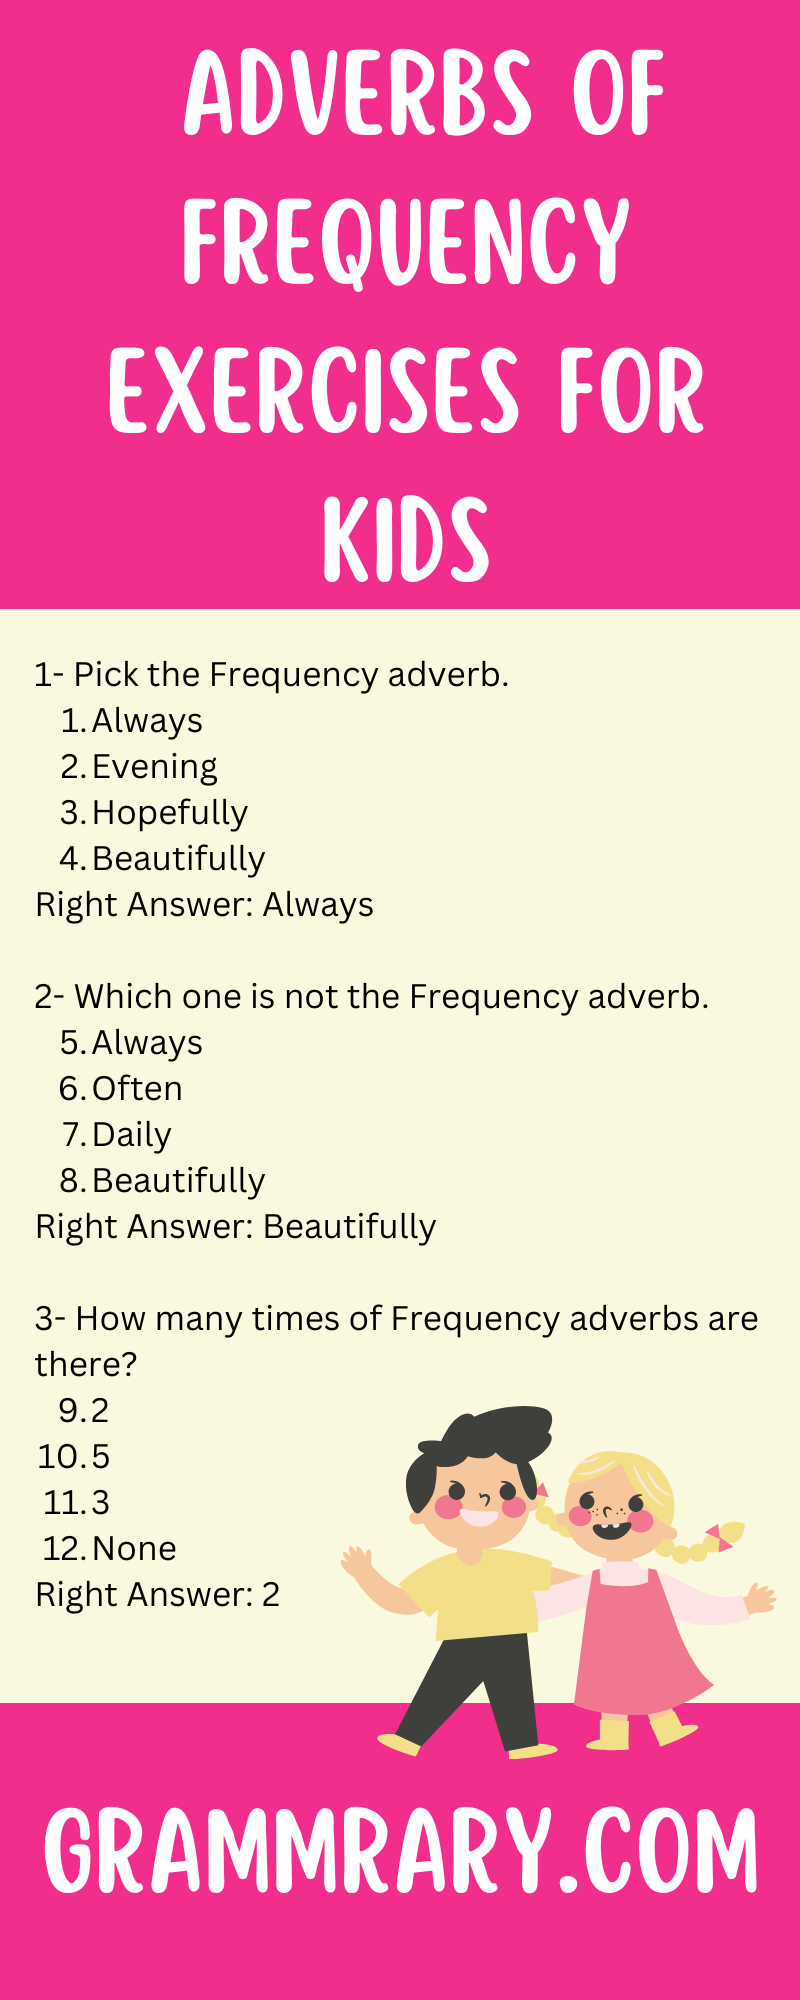 Adverb of Frequency Exercise for Kids